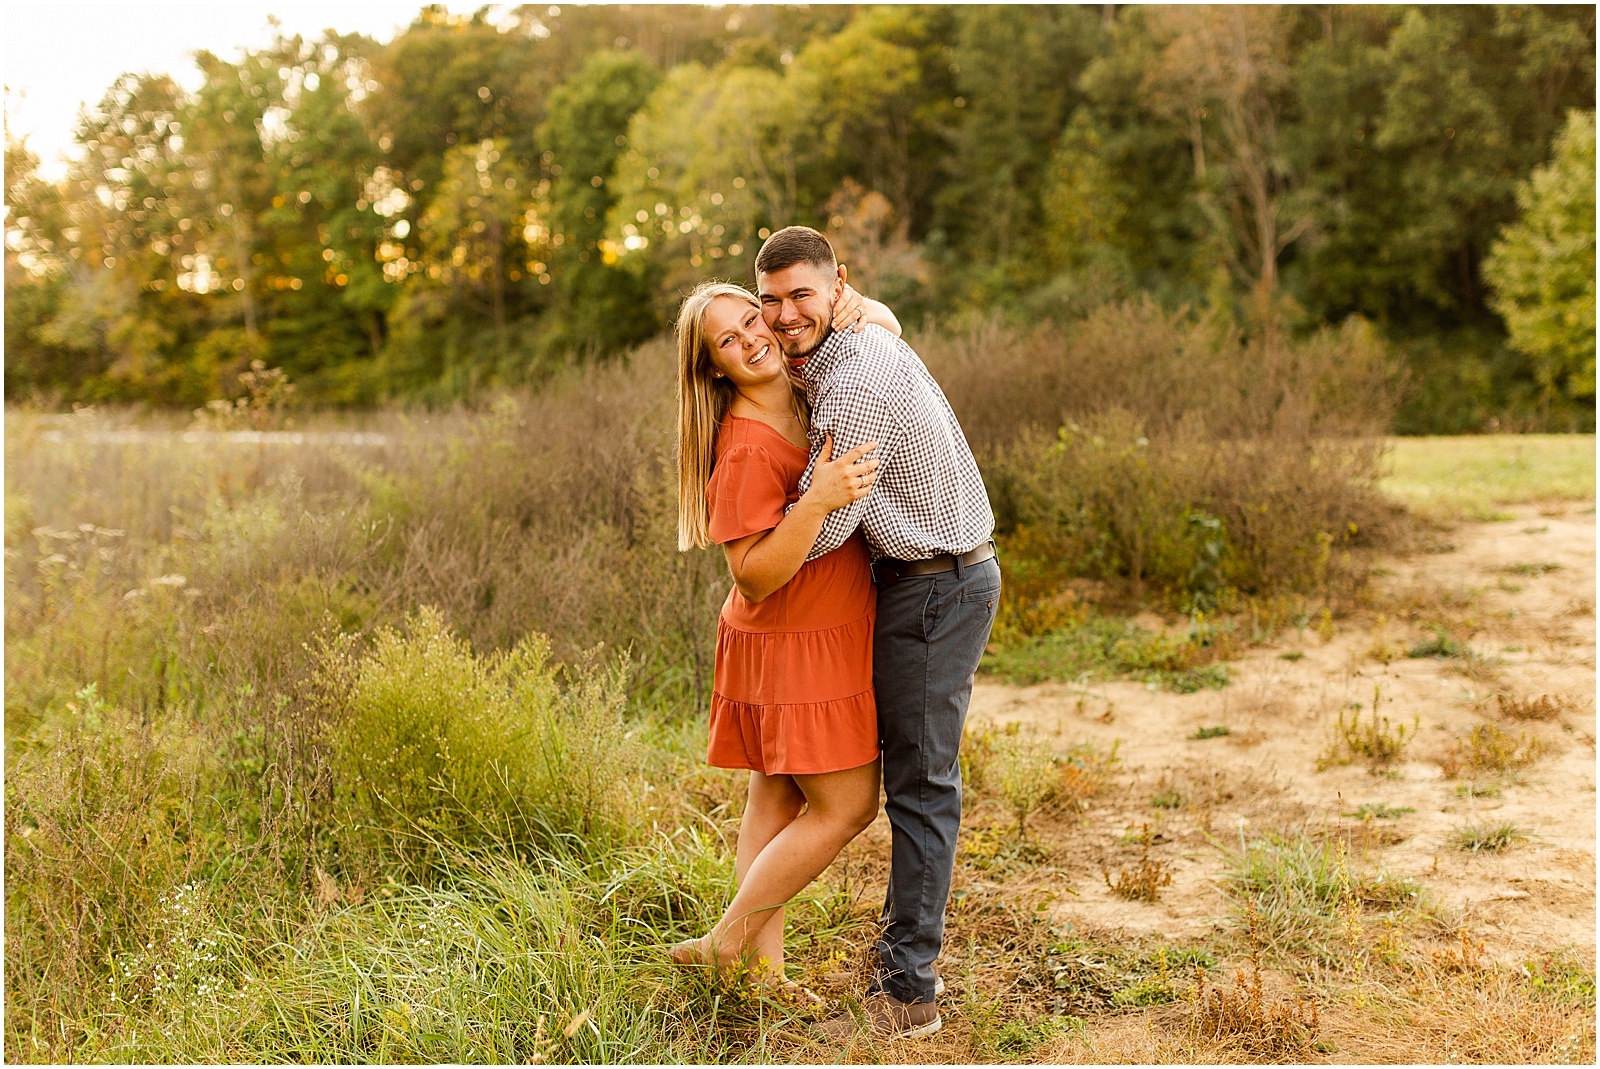 Claire and Kane's Riverside Engagement Session Bret and Brandie Photography | Evansville Indiana Wedding Photographers_0026.jpg